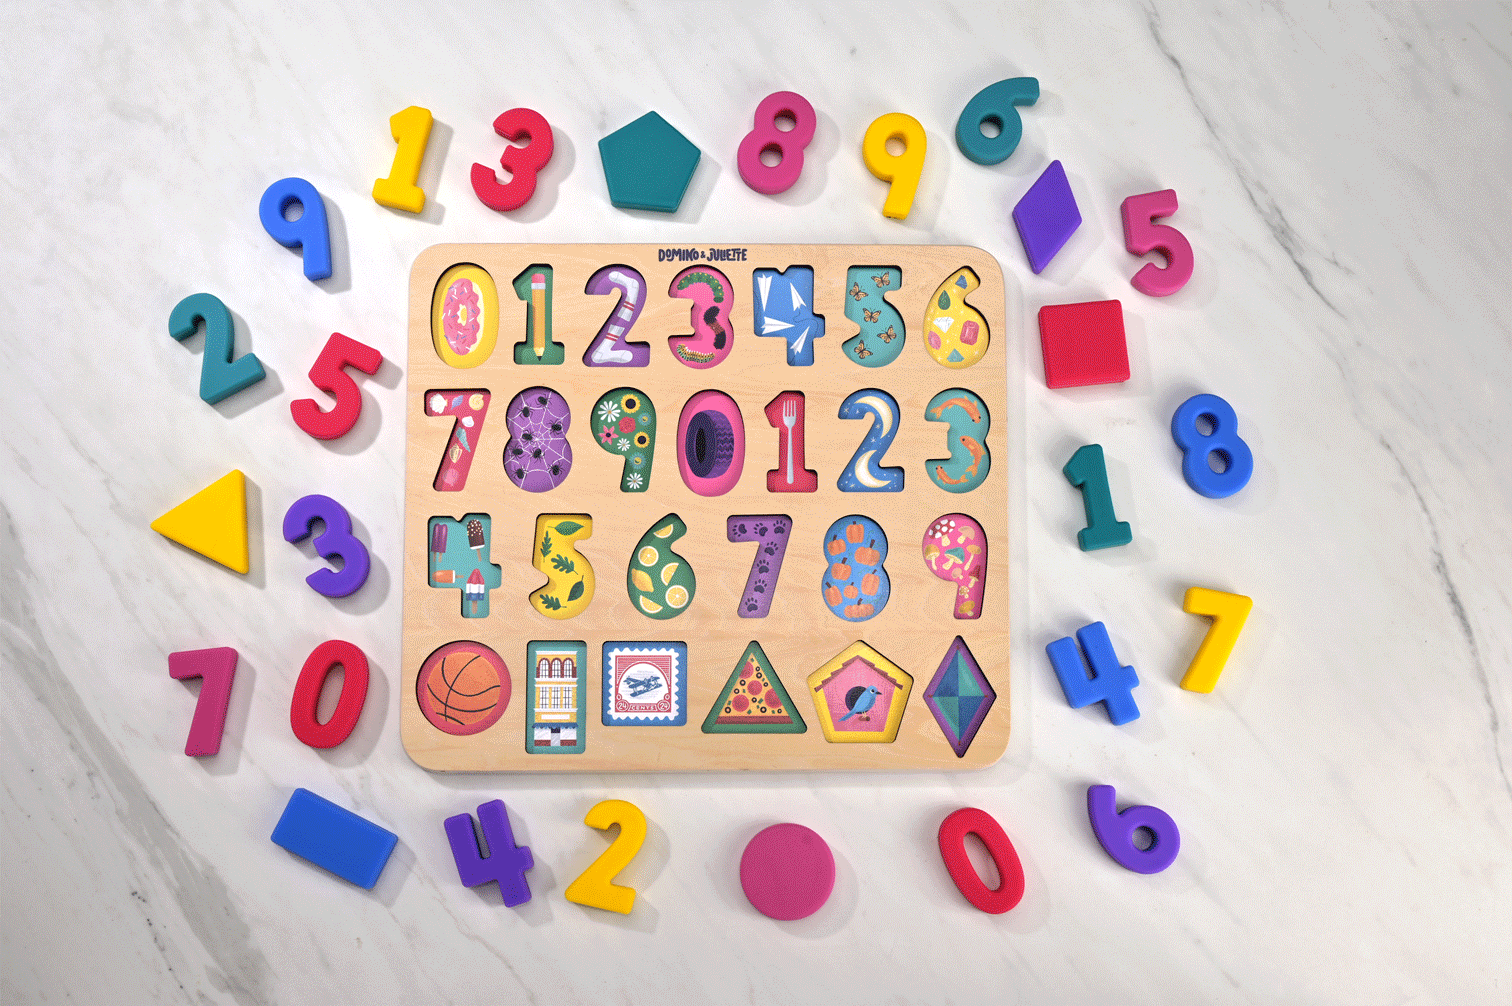 Numeric Puzzle Board, Number Puzzle Board, ABC Puzzle Board, Alphabet Puzzle Board, 123 Puzzle Board, Puzzle Board, Kids Puzzle board, Wooden Alphabet Puzzle Board, Silicone Puzzle Pieces, Seek and Sort Puzzle, Educational Toy, Number Recognition toy for kids, Shape Recognition toy for kids, Counting toys for kids, Safe puzzles for Kids, Toy Library, Age-appropriate Puzzles, Preschoolers, 2-year-olds, Indoor Activities for 4-year-olds, Daycare Activities, Fun and Engaging Sensory Experience.